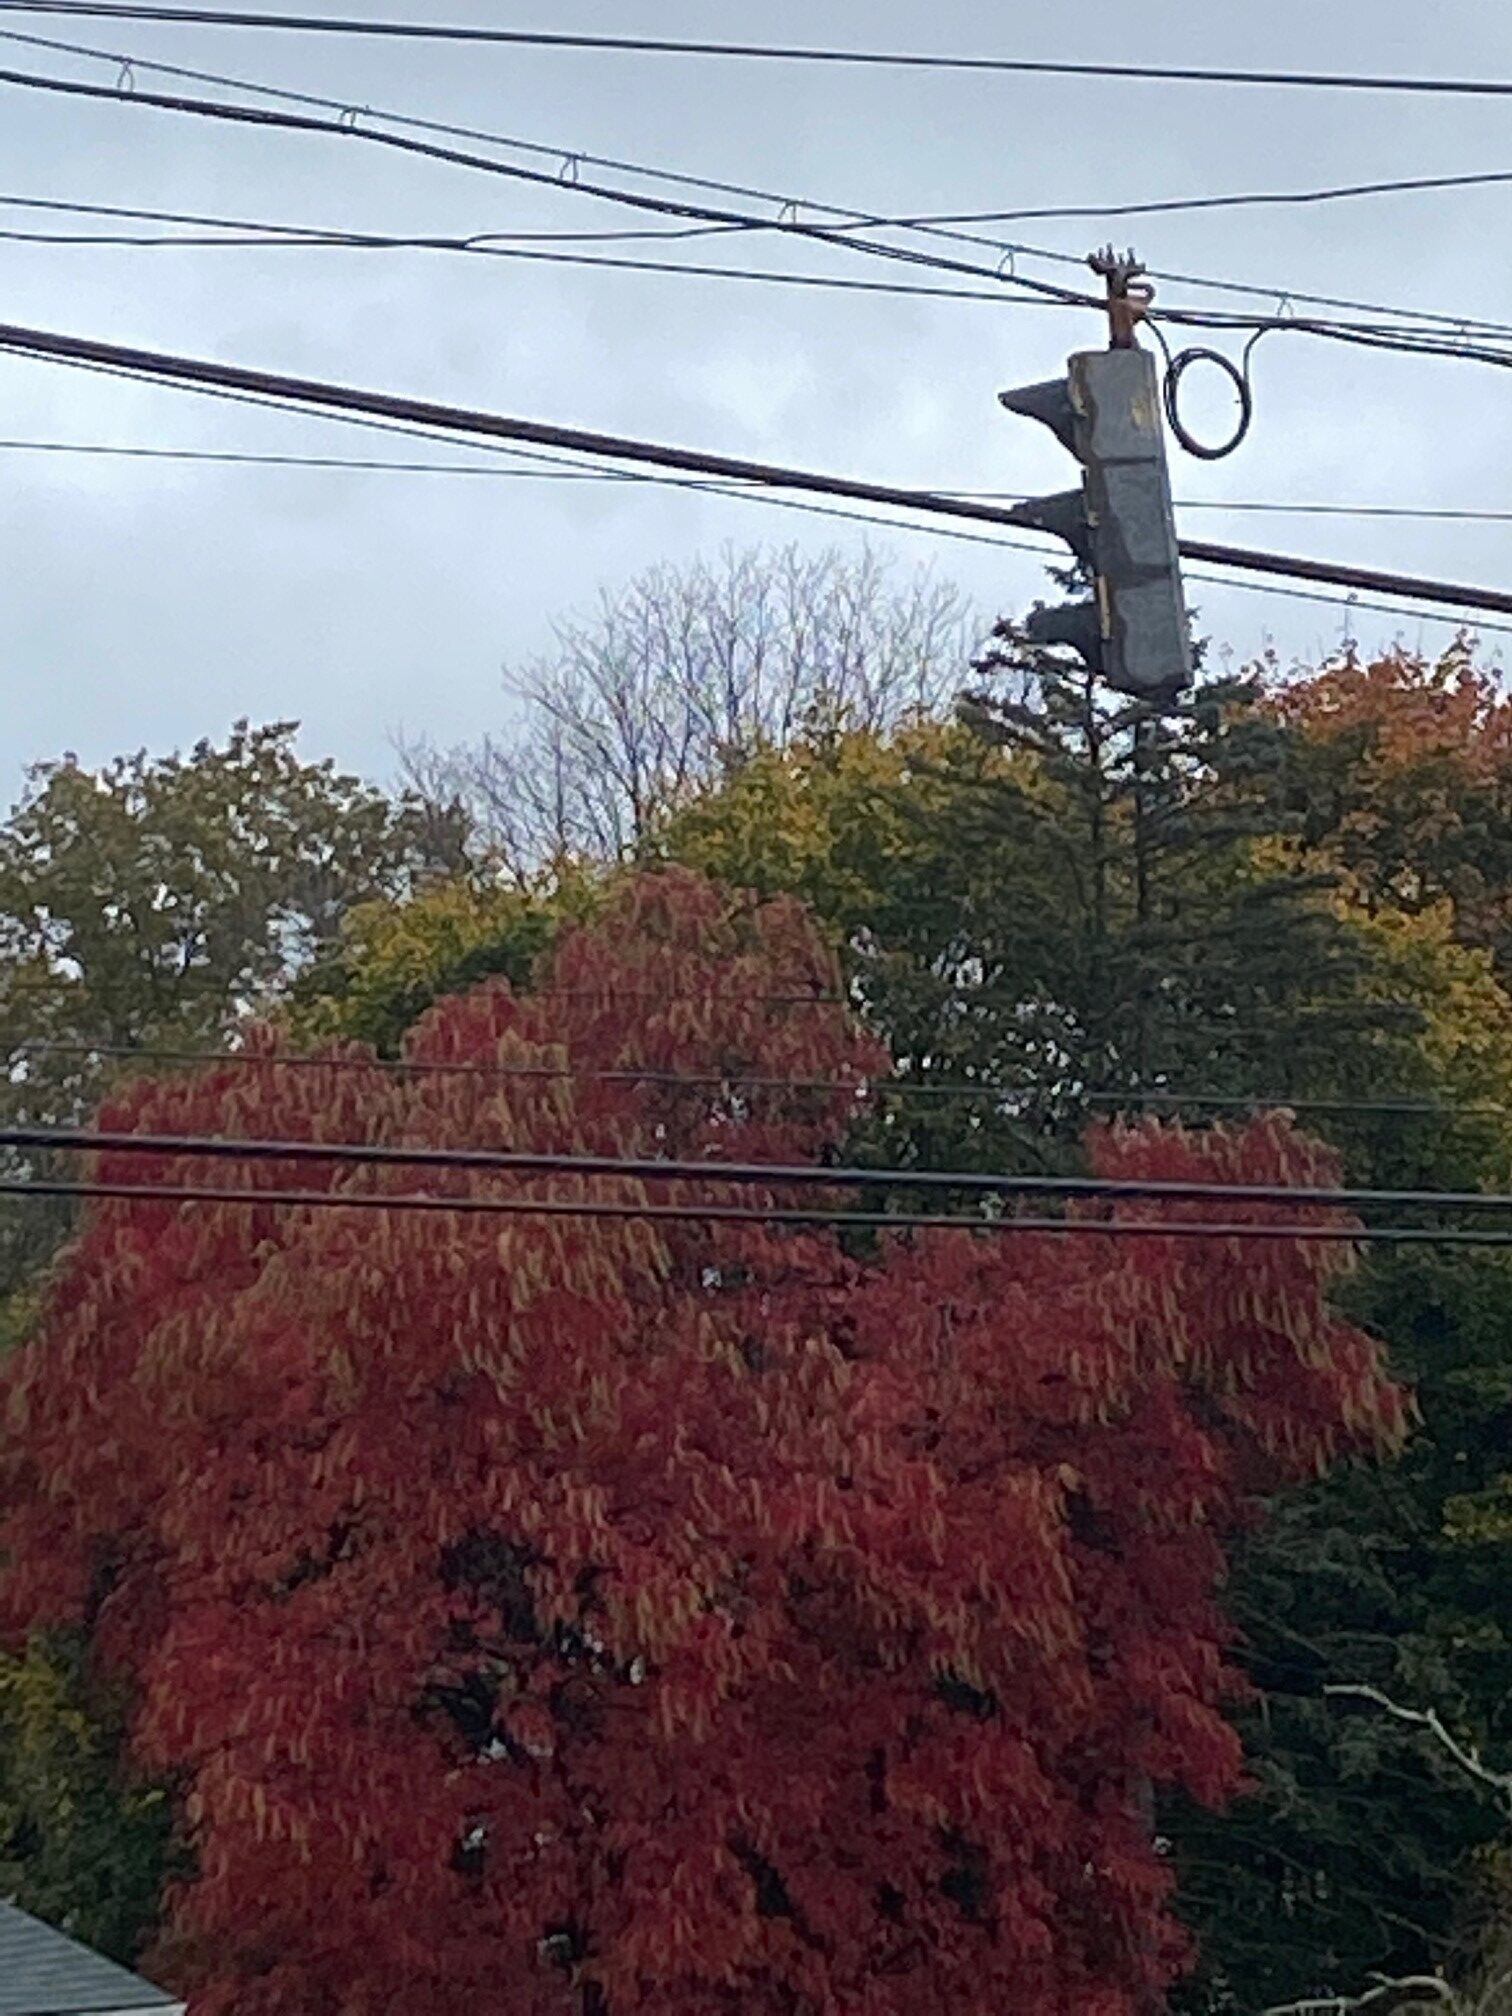 Got to see some fall colors